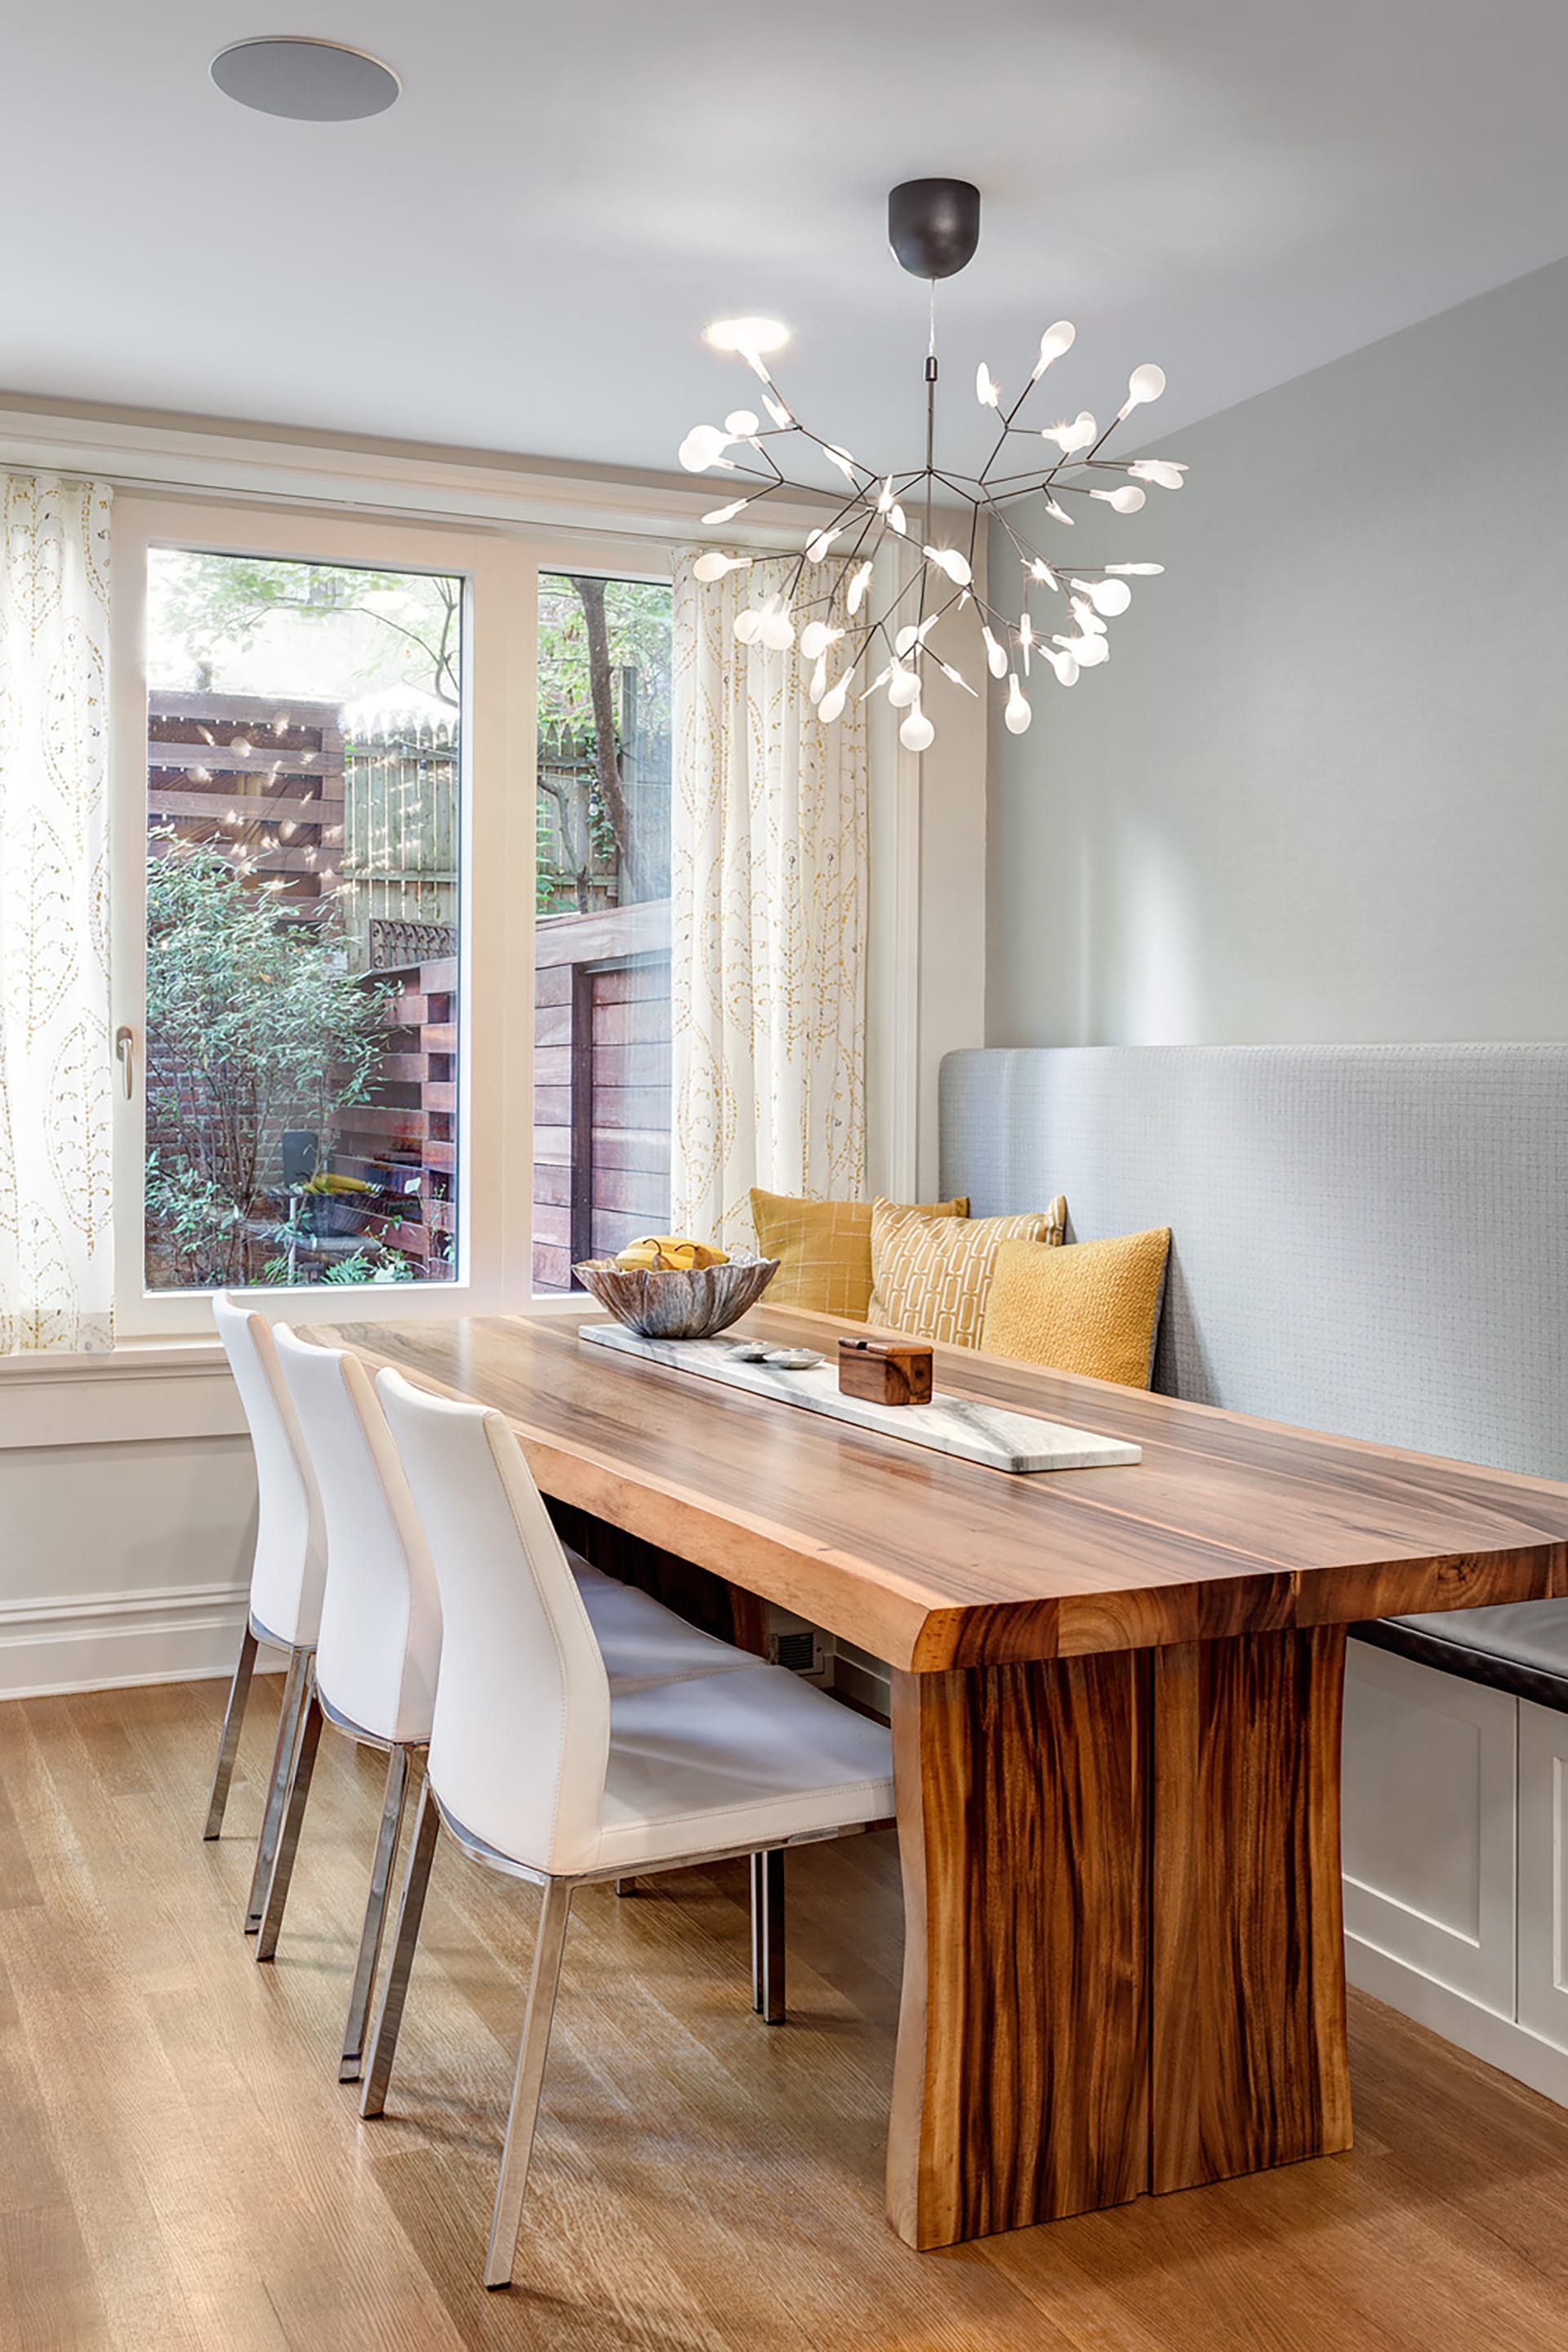 Breakfast nook with a chandelier and sliding glass doors leading out to a roof deck.